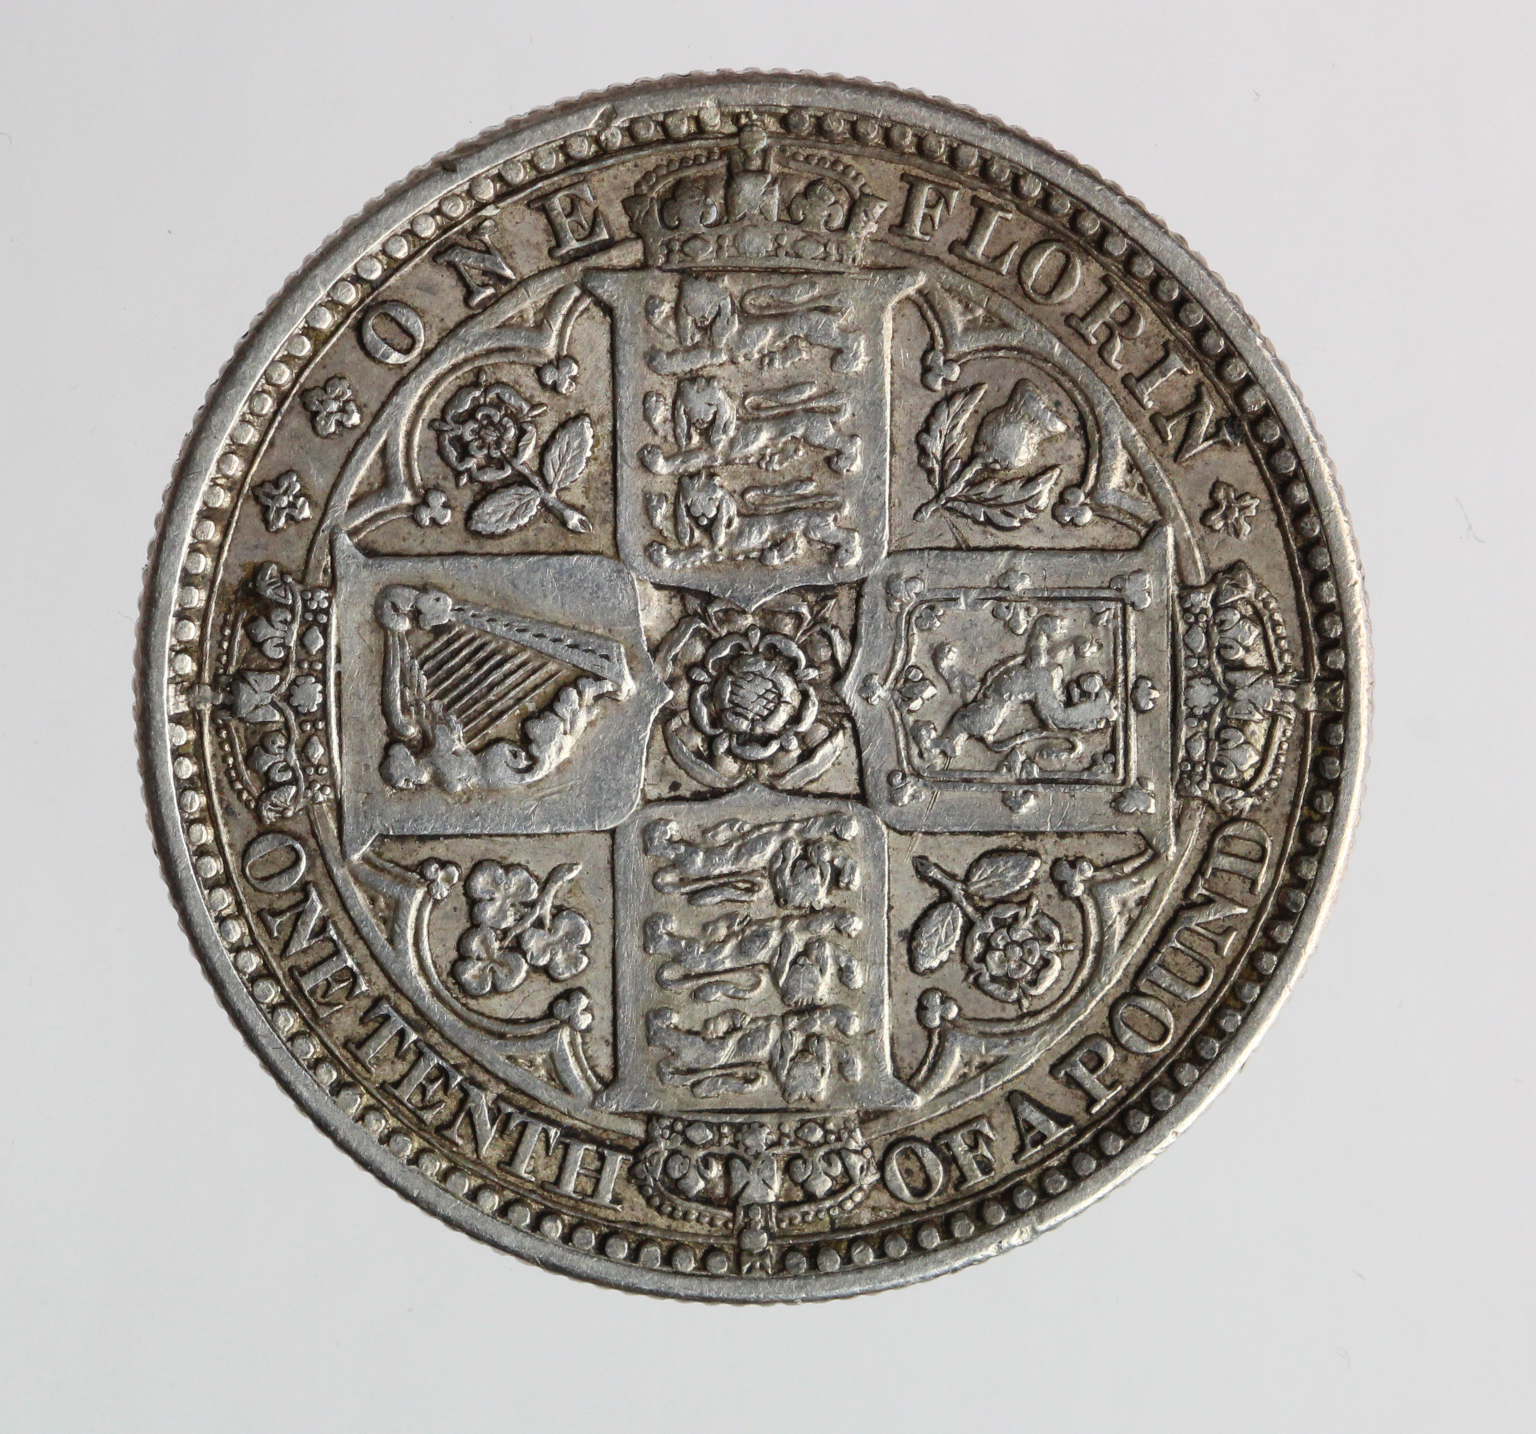 Florin 1849 "godless" gothic, VF - Image 2 of 2